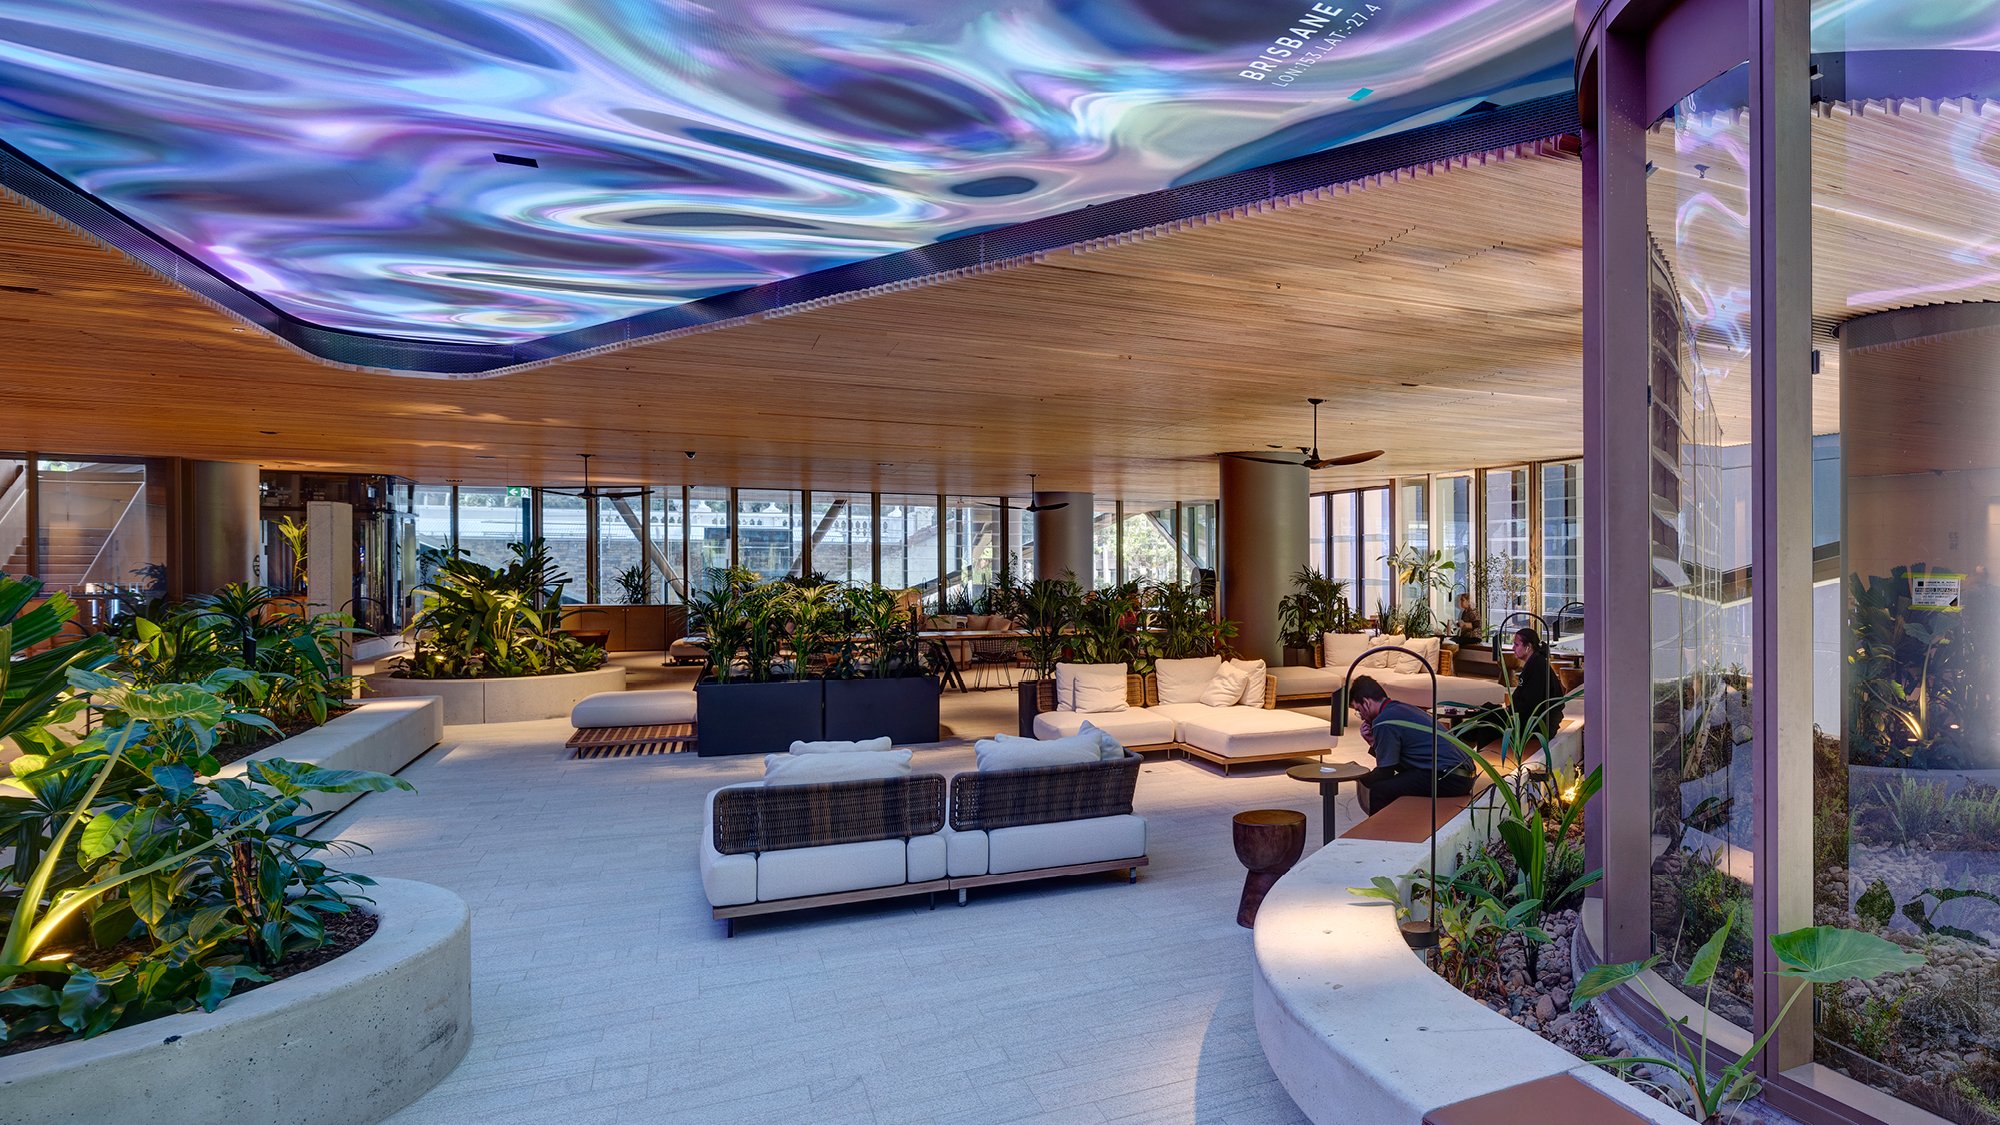 Modern office space with curved garden beds with plants, adaptable seating, open space, natural air, glass facade and a decorative LED display ceiling